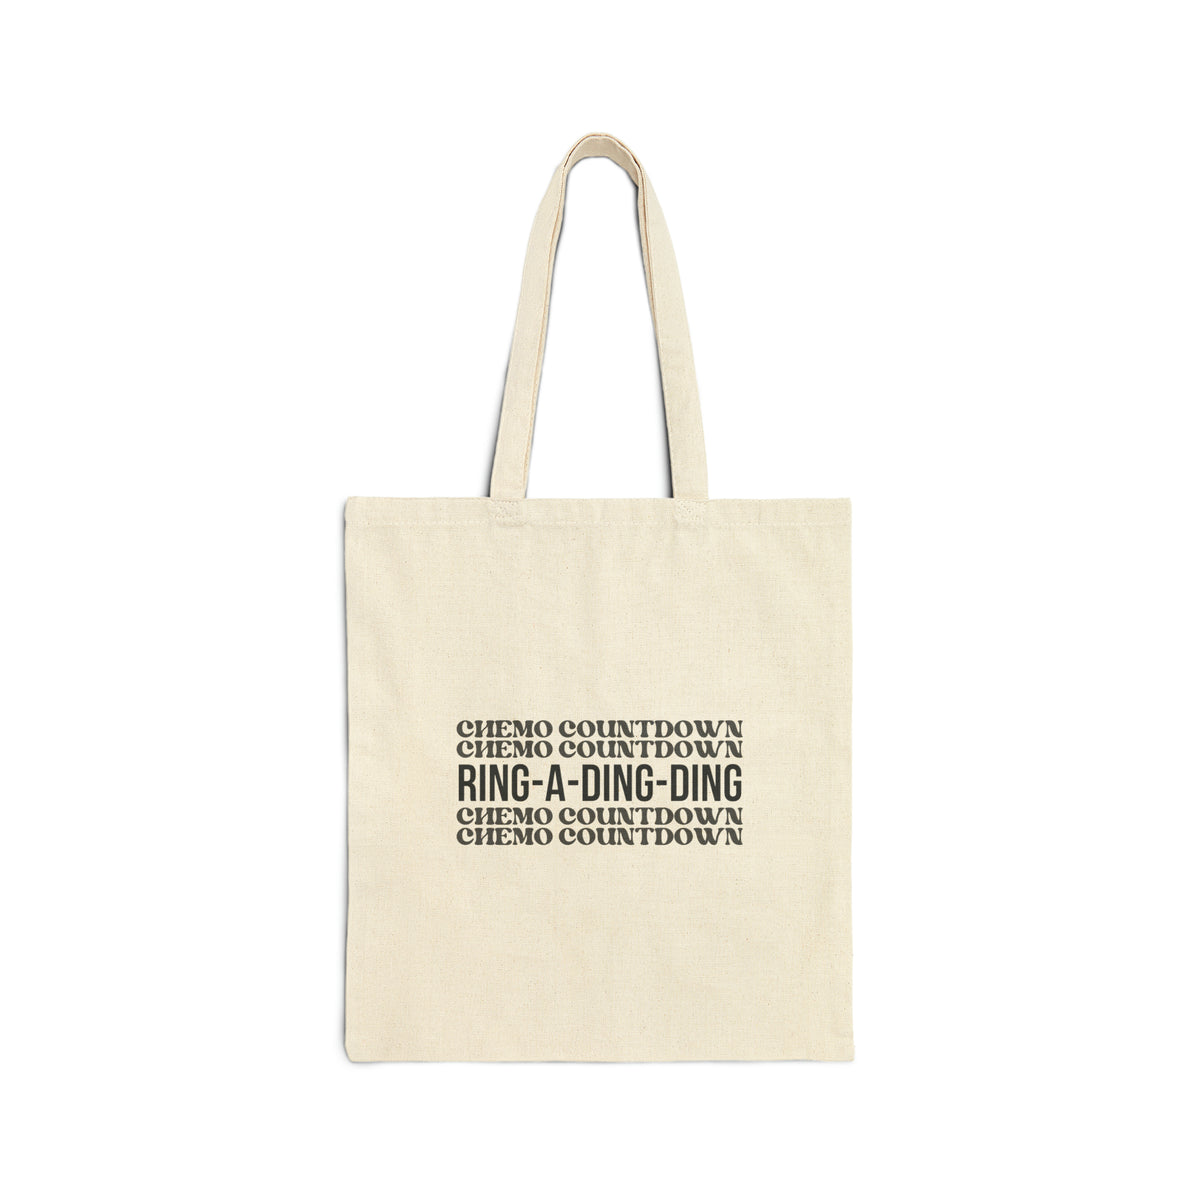 Chemo Countdown: Ring-A-Ding-Ding Tote Bag